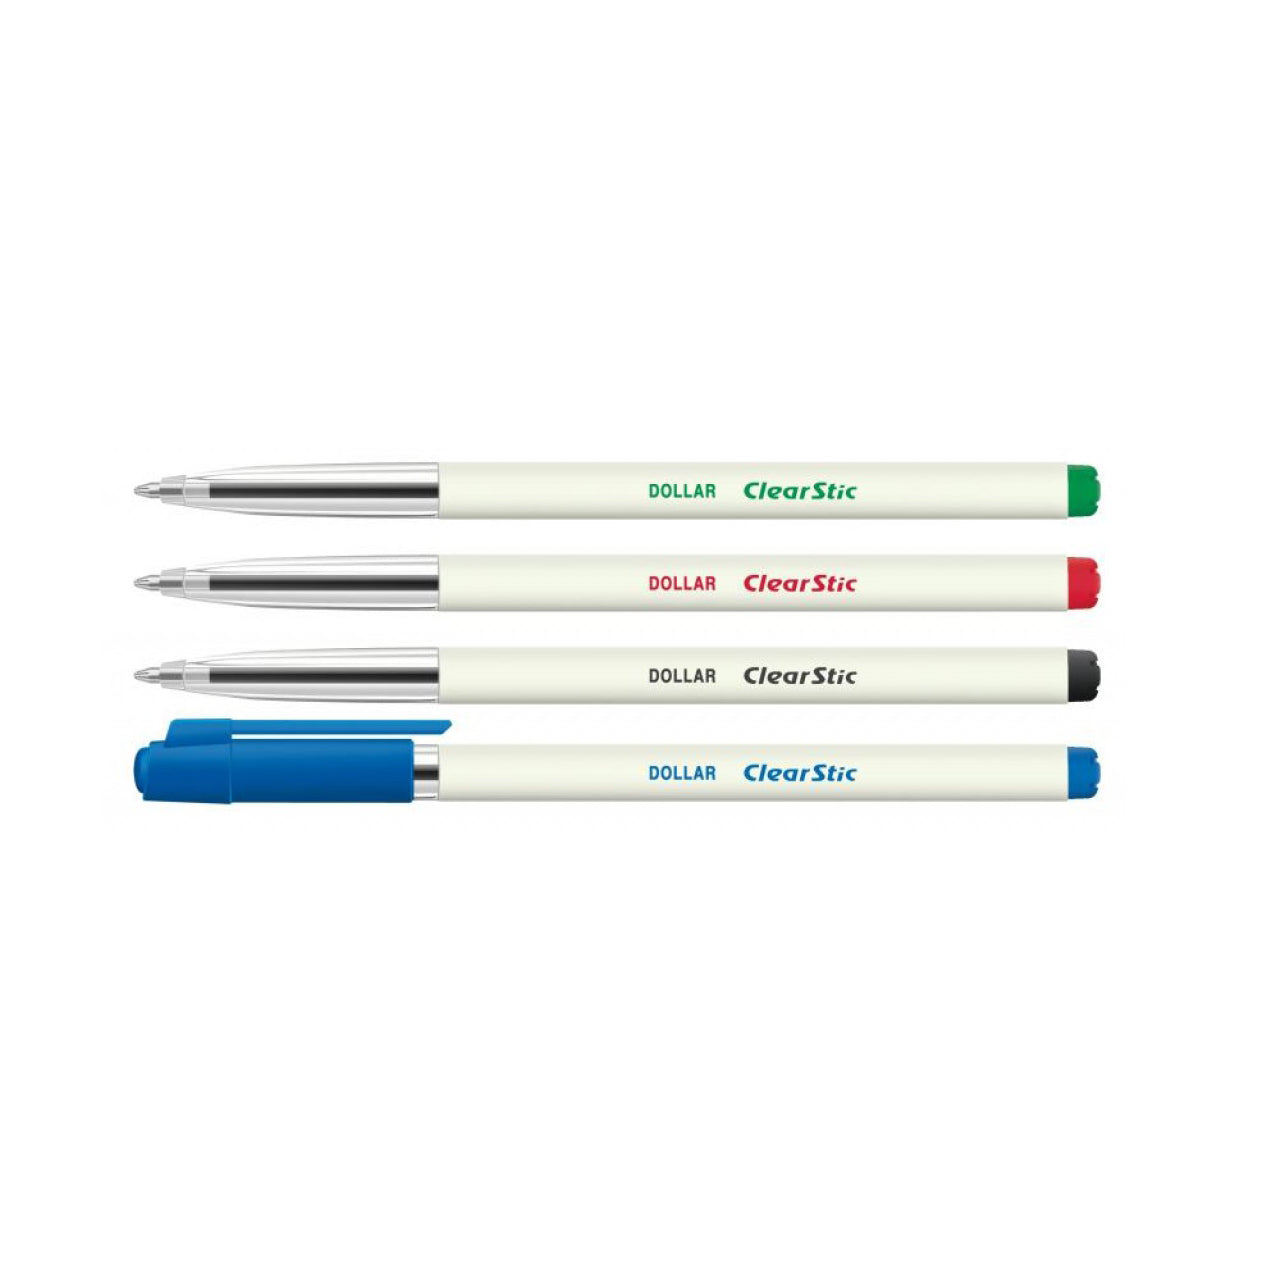 Dollar® Offer Clear Stic® F 0.7mm Ball Pen Pack of 10's X 50 Free Highlighter HL-625 Pack of 30's & Dollar® Offer Clear Stic® F 0.7mm Ball Pen Pack of 10's X 25 Free Highlighter HL-625 Pack of 15's